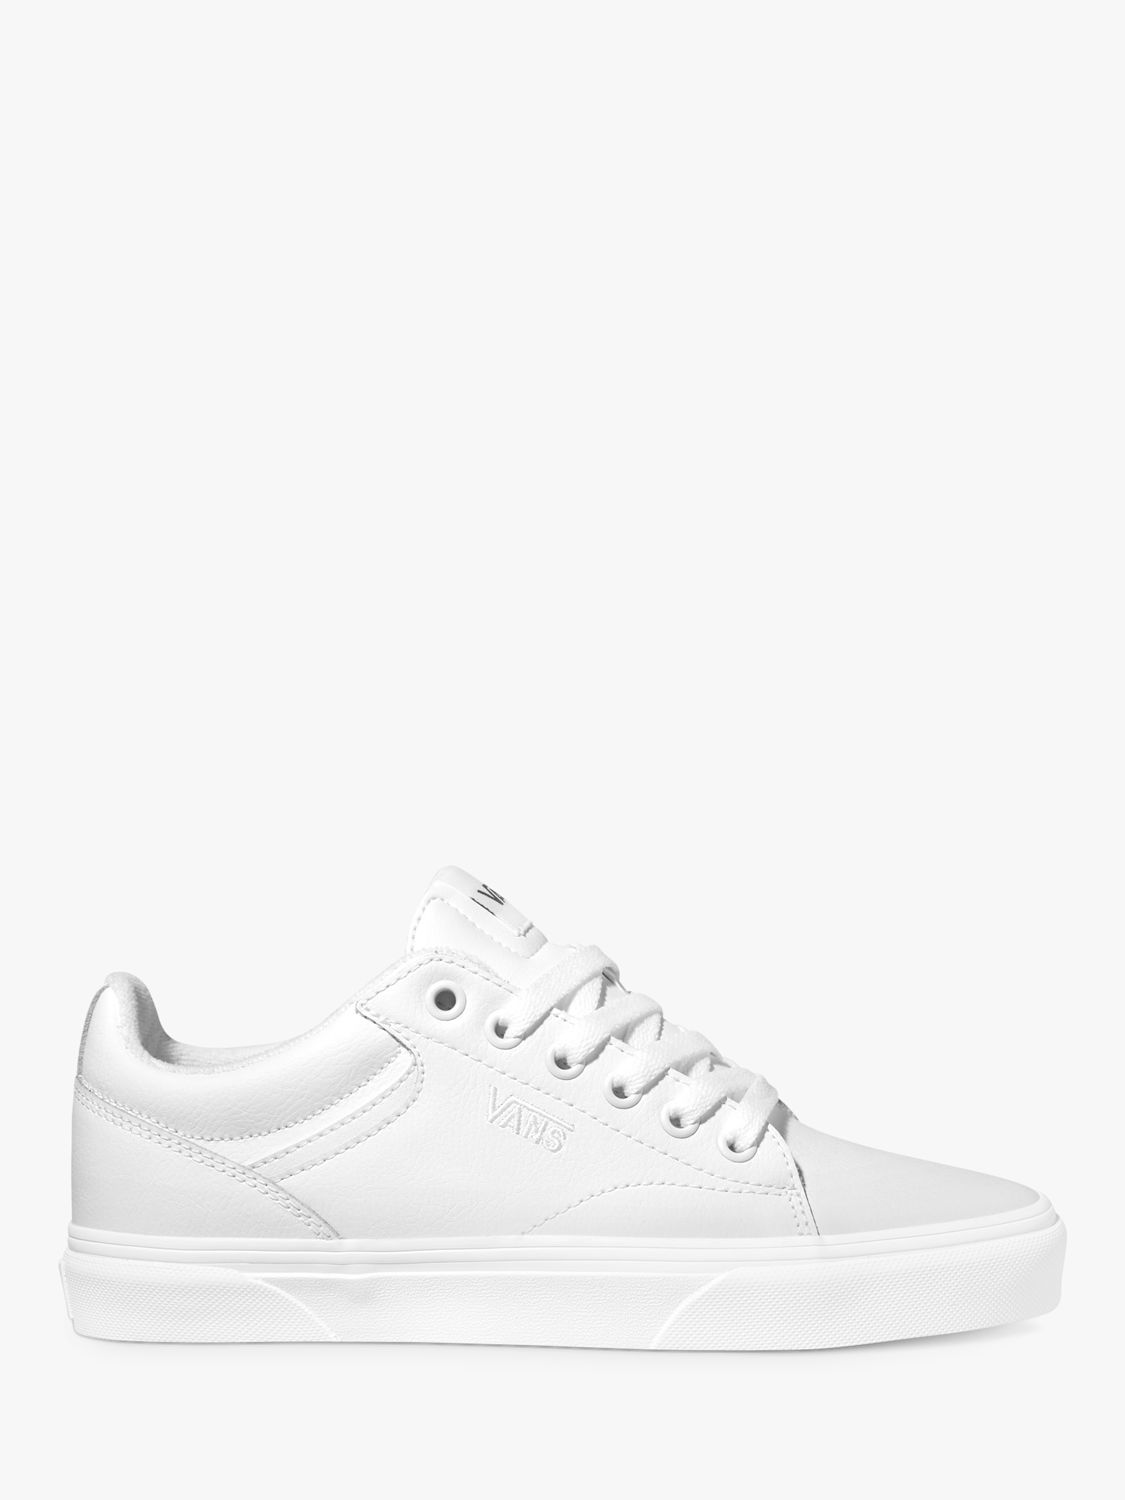 Vans Kids' Leather Seldan Court Lace Up Trainers, White, 7